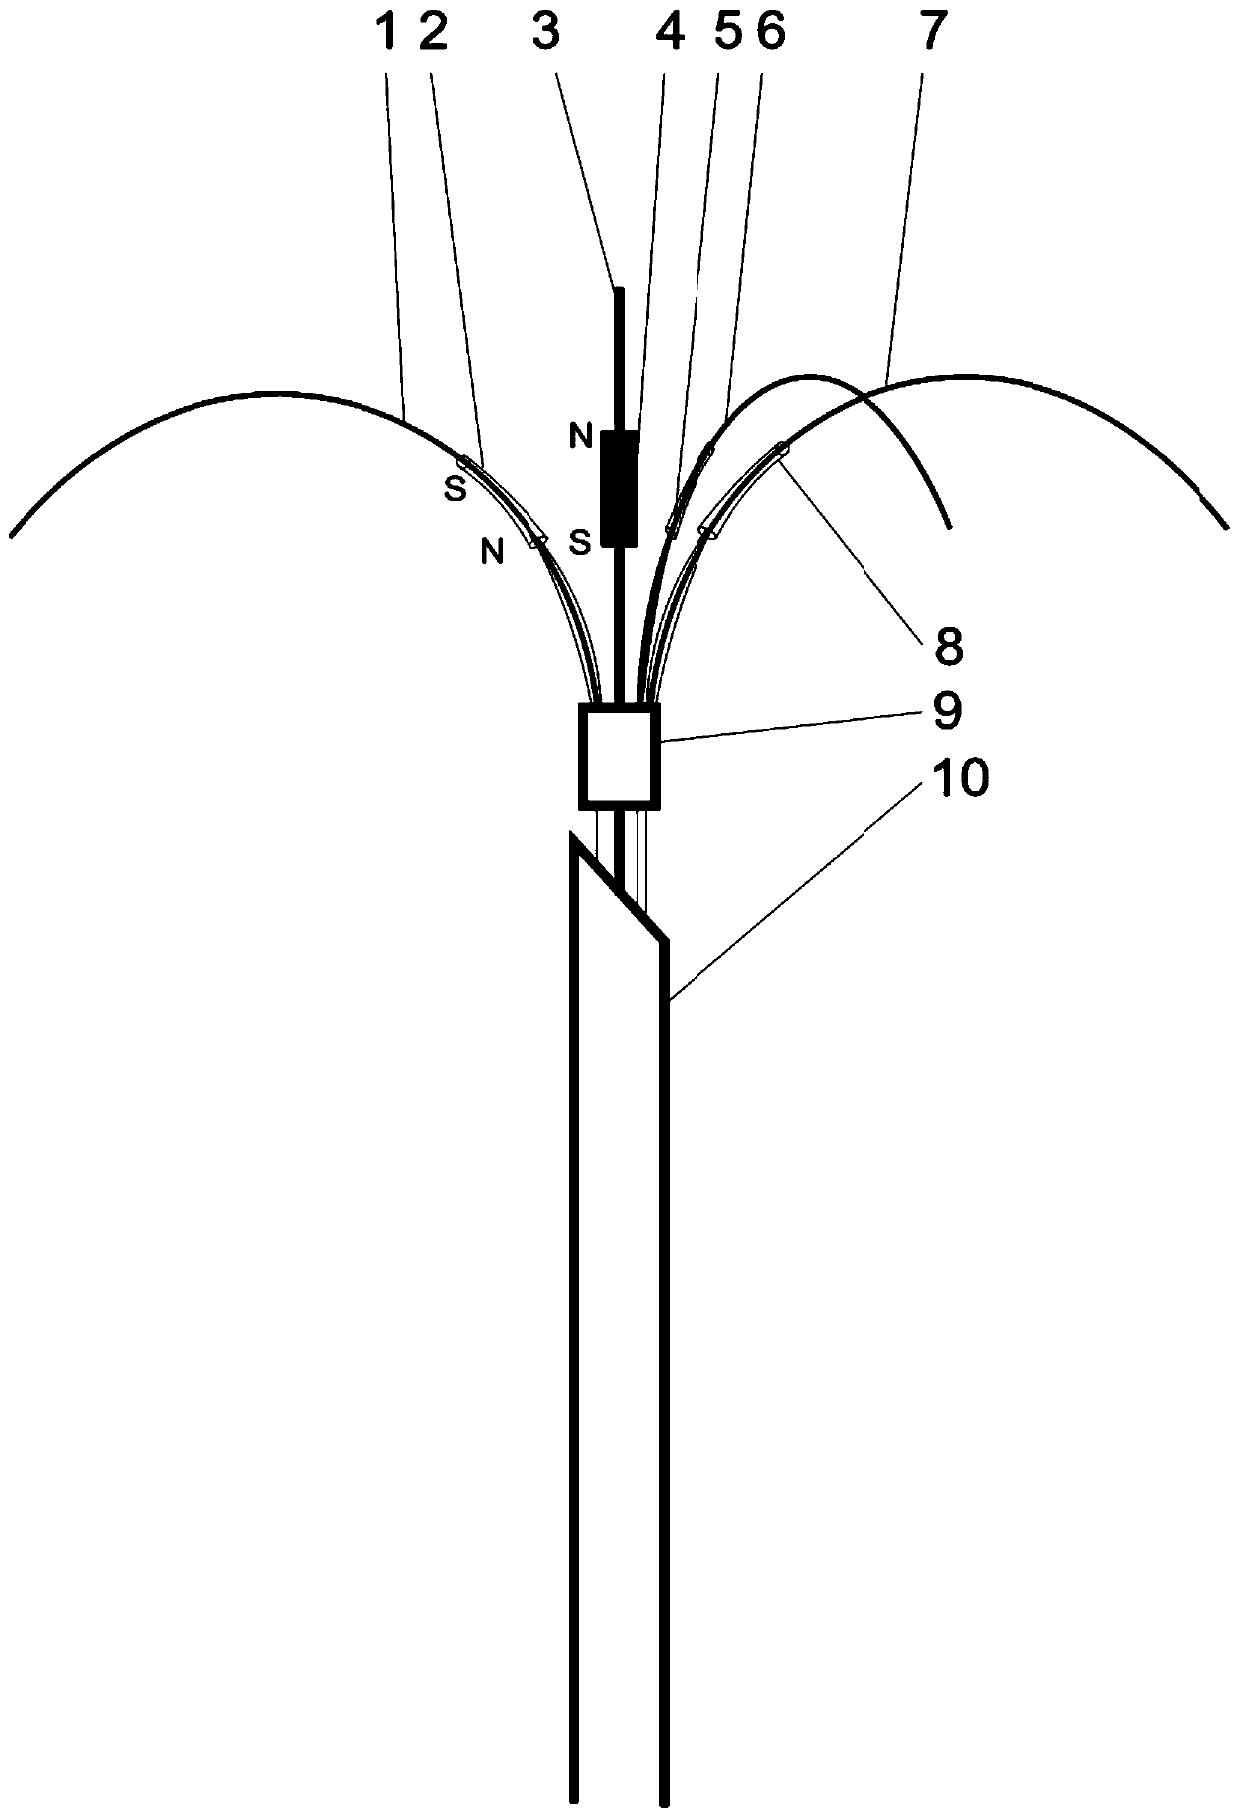 Multi-jaw active conformal ablation needle with function of magnetic control